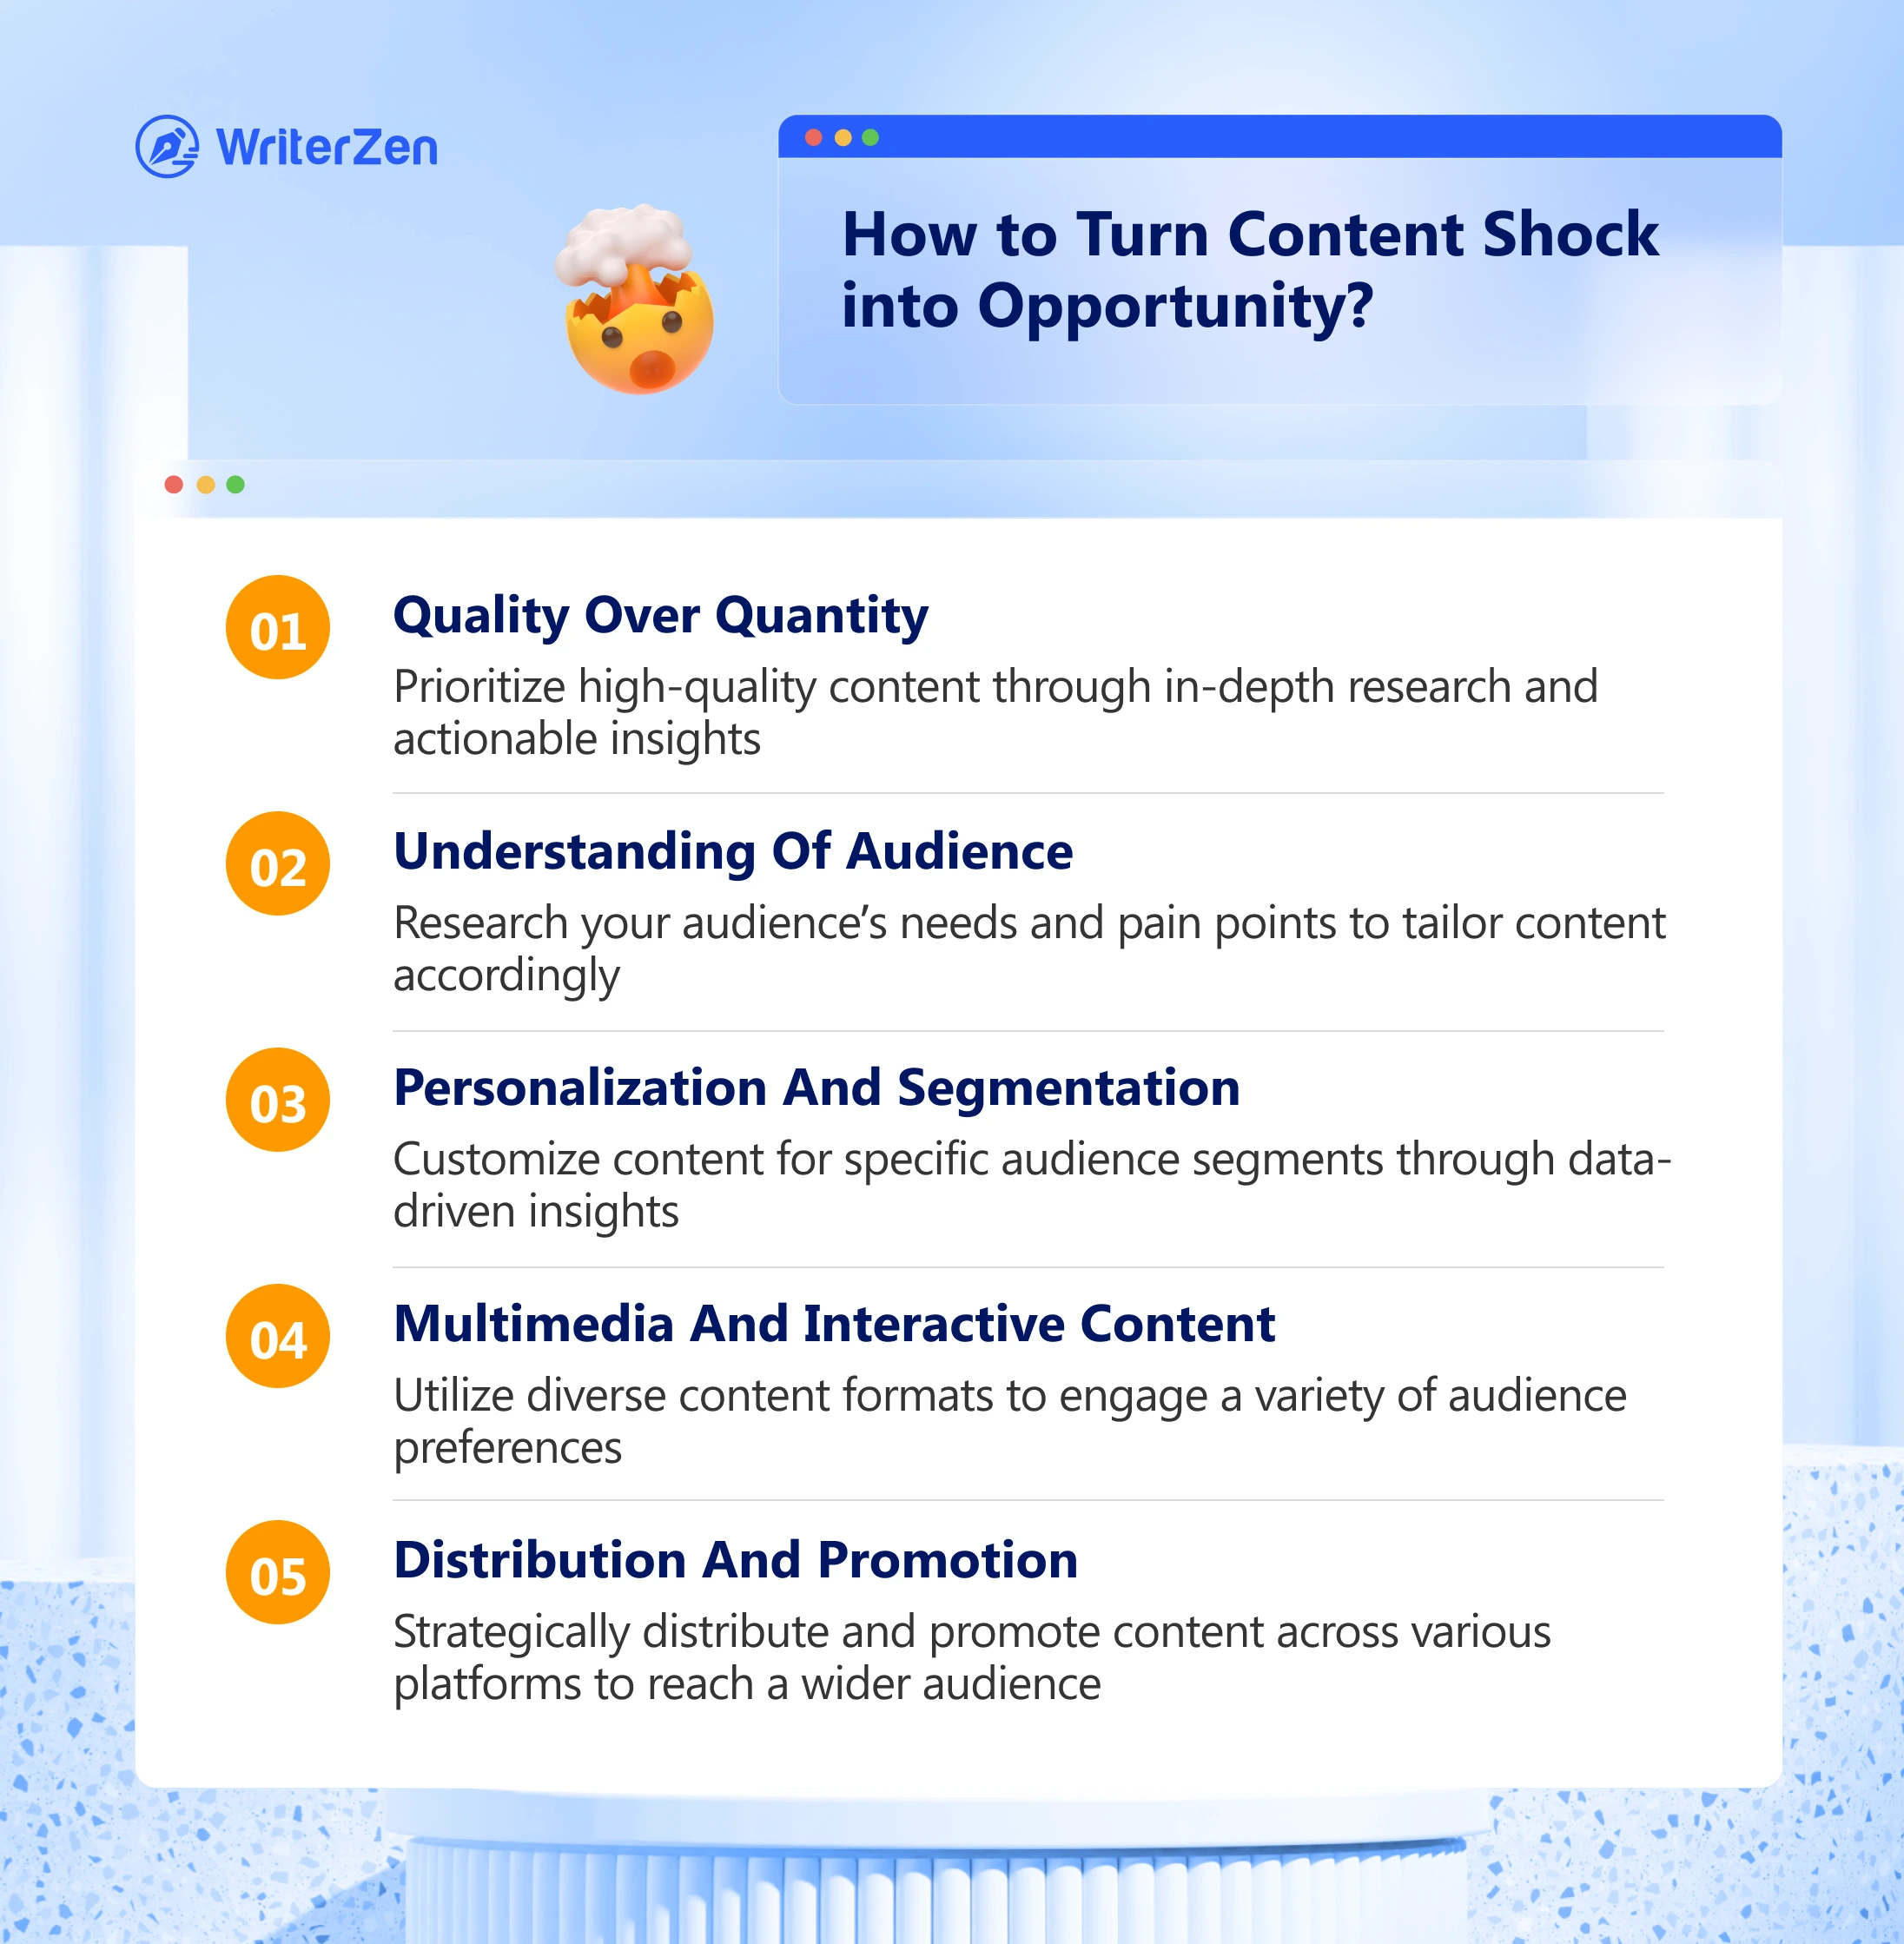 How to turn content shock into opportunity